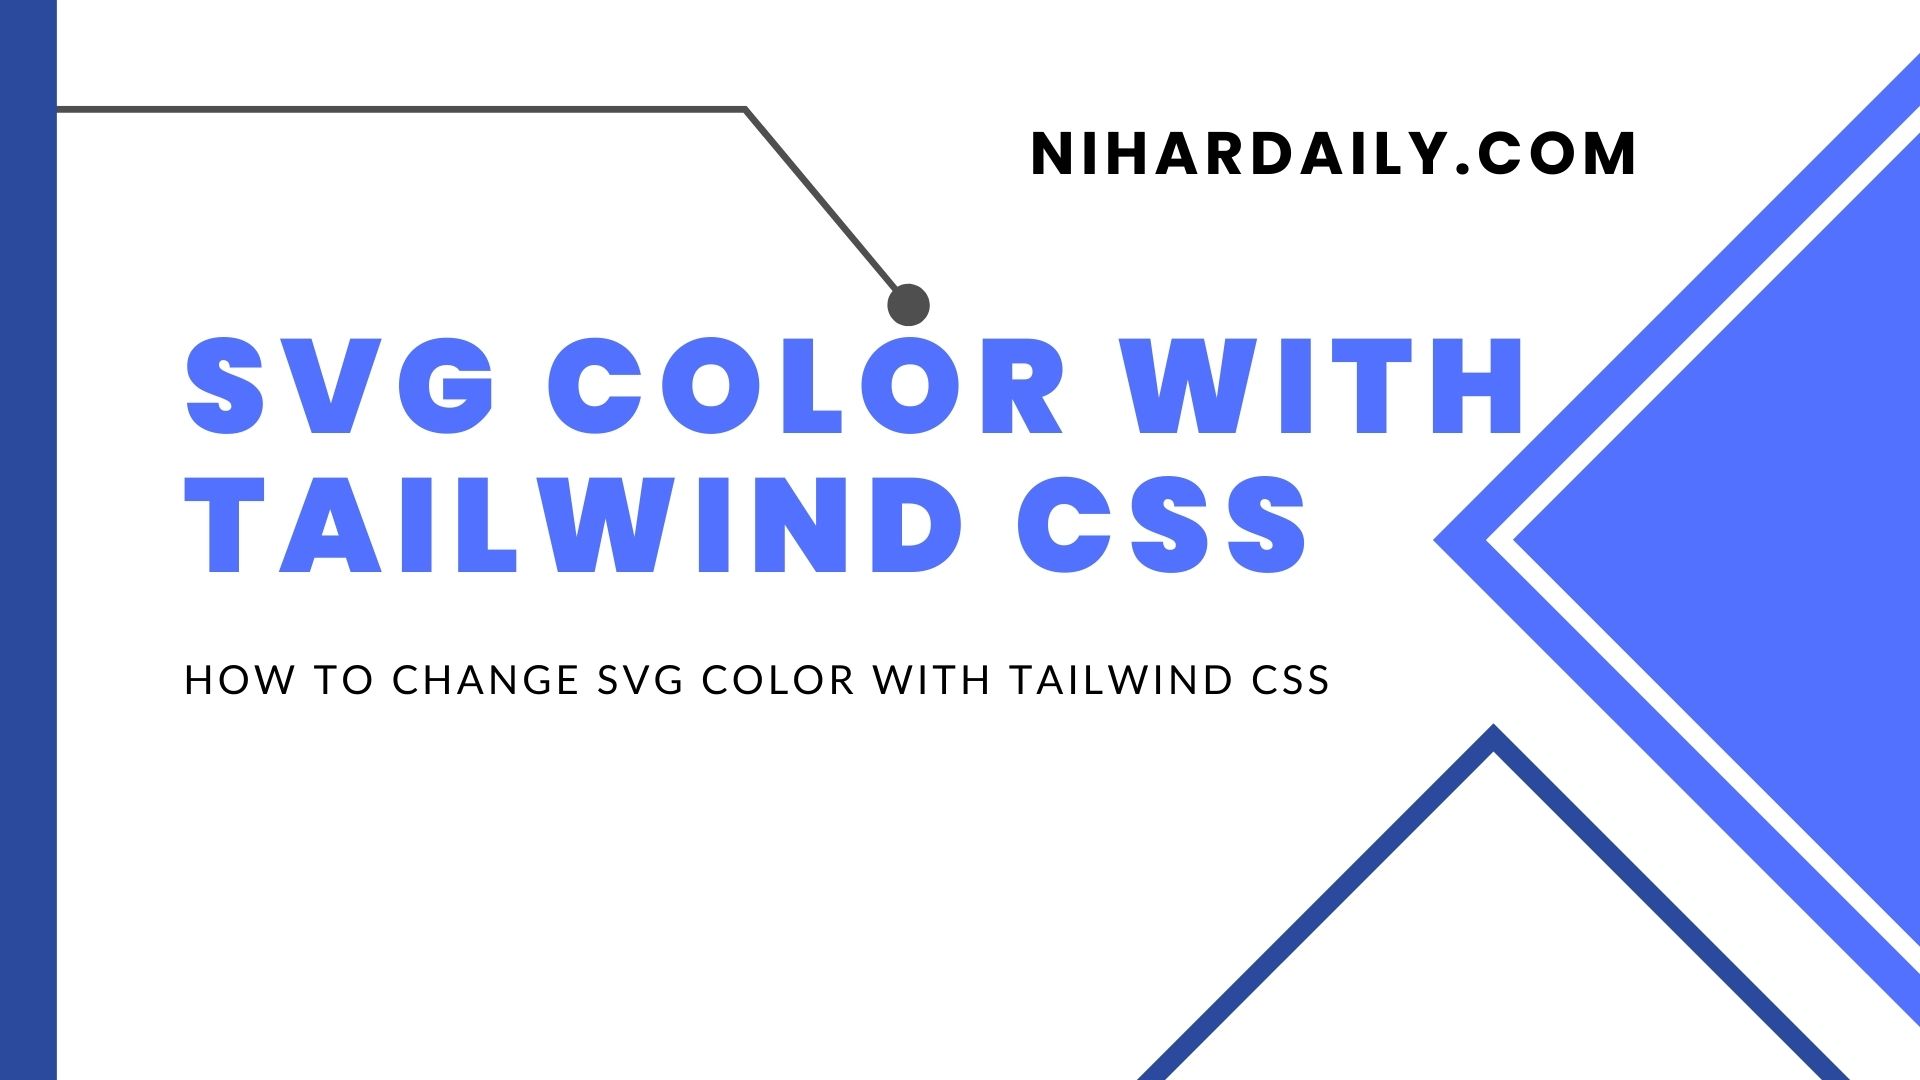 How to Change SVG Color with Tailwind CSS